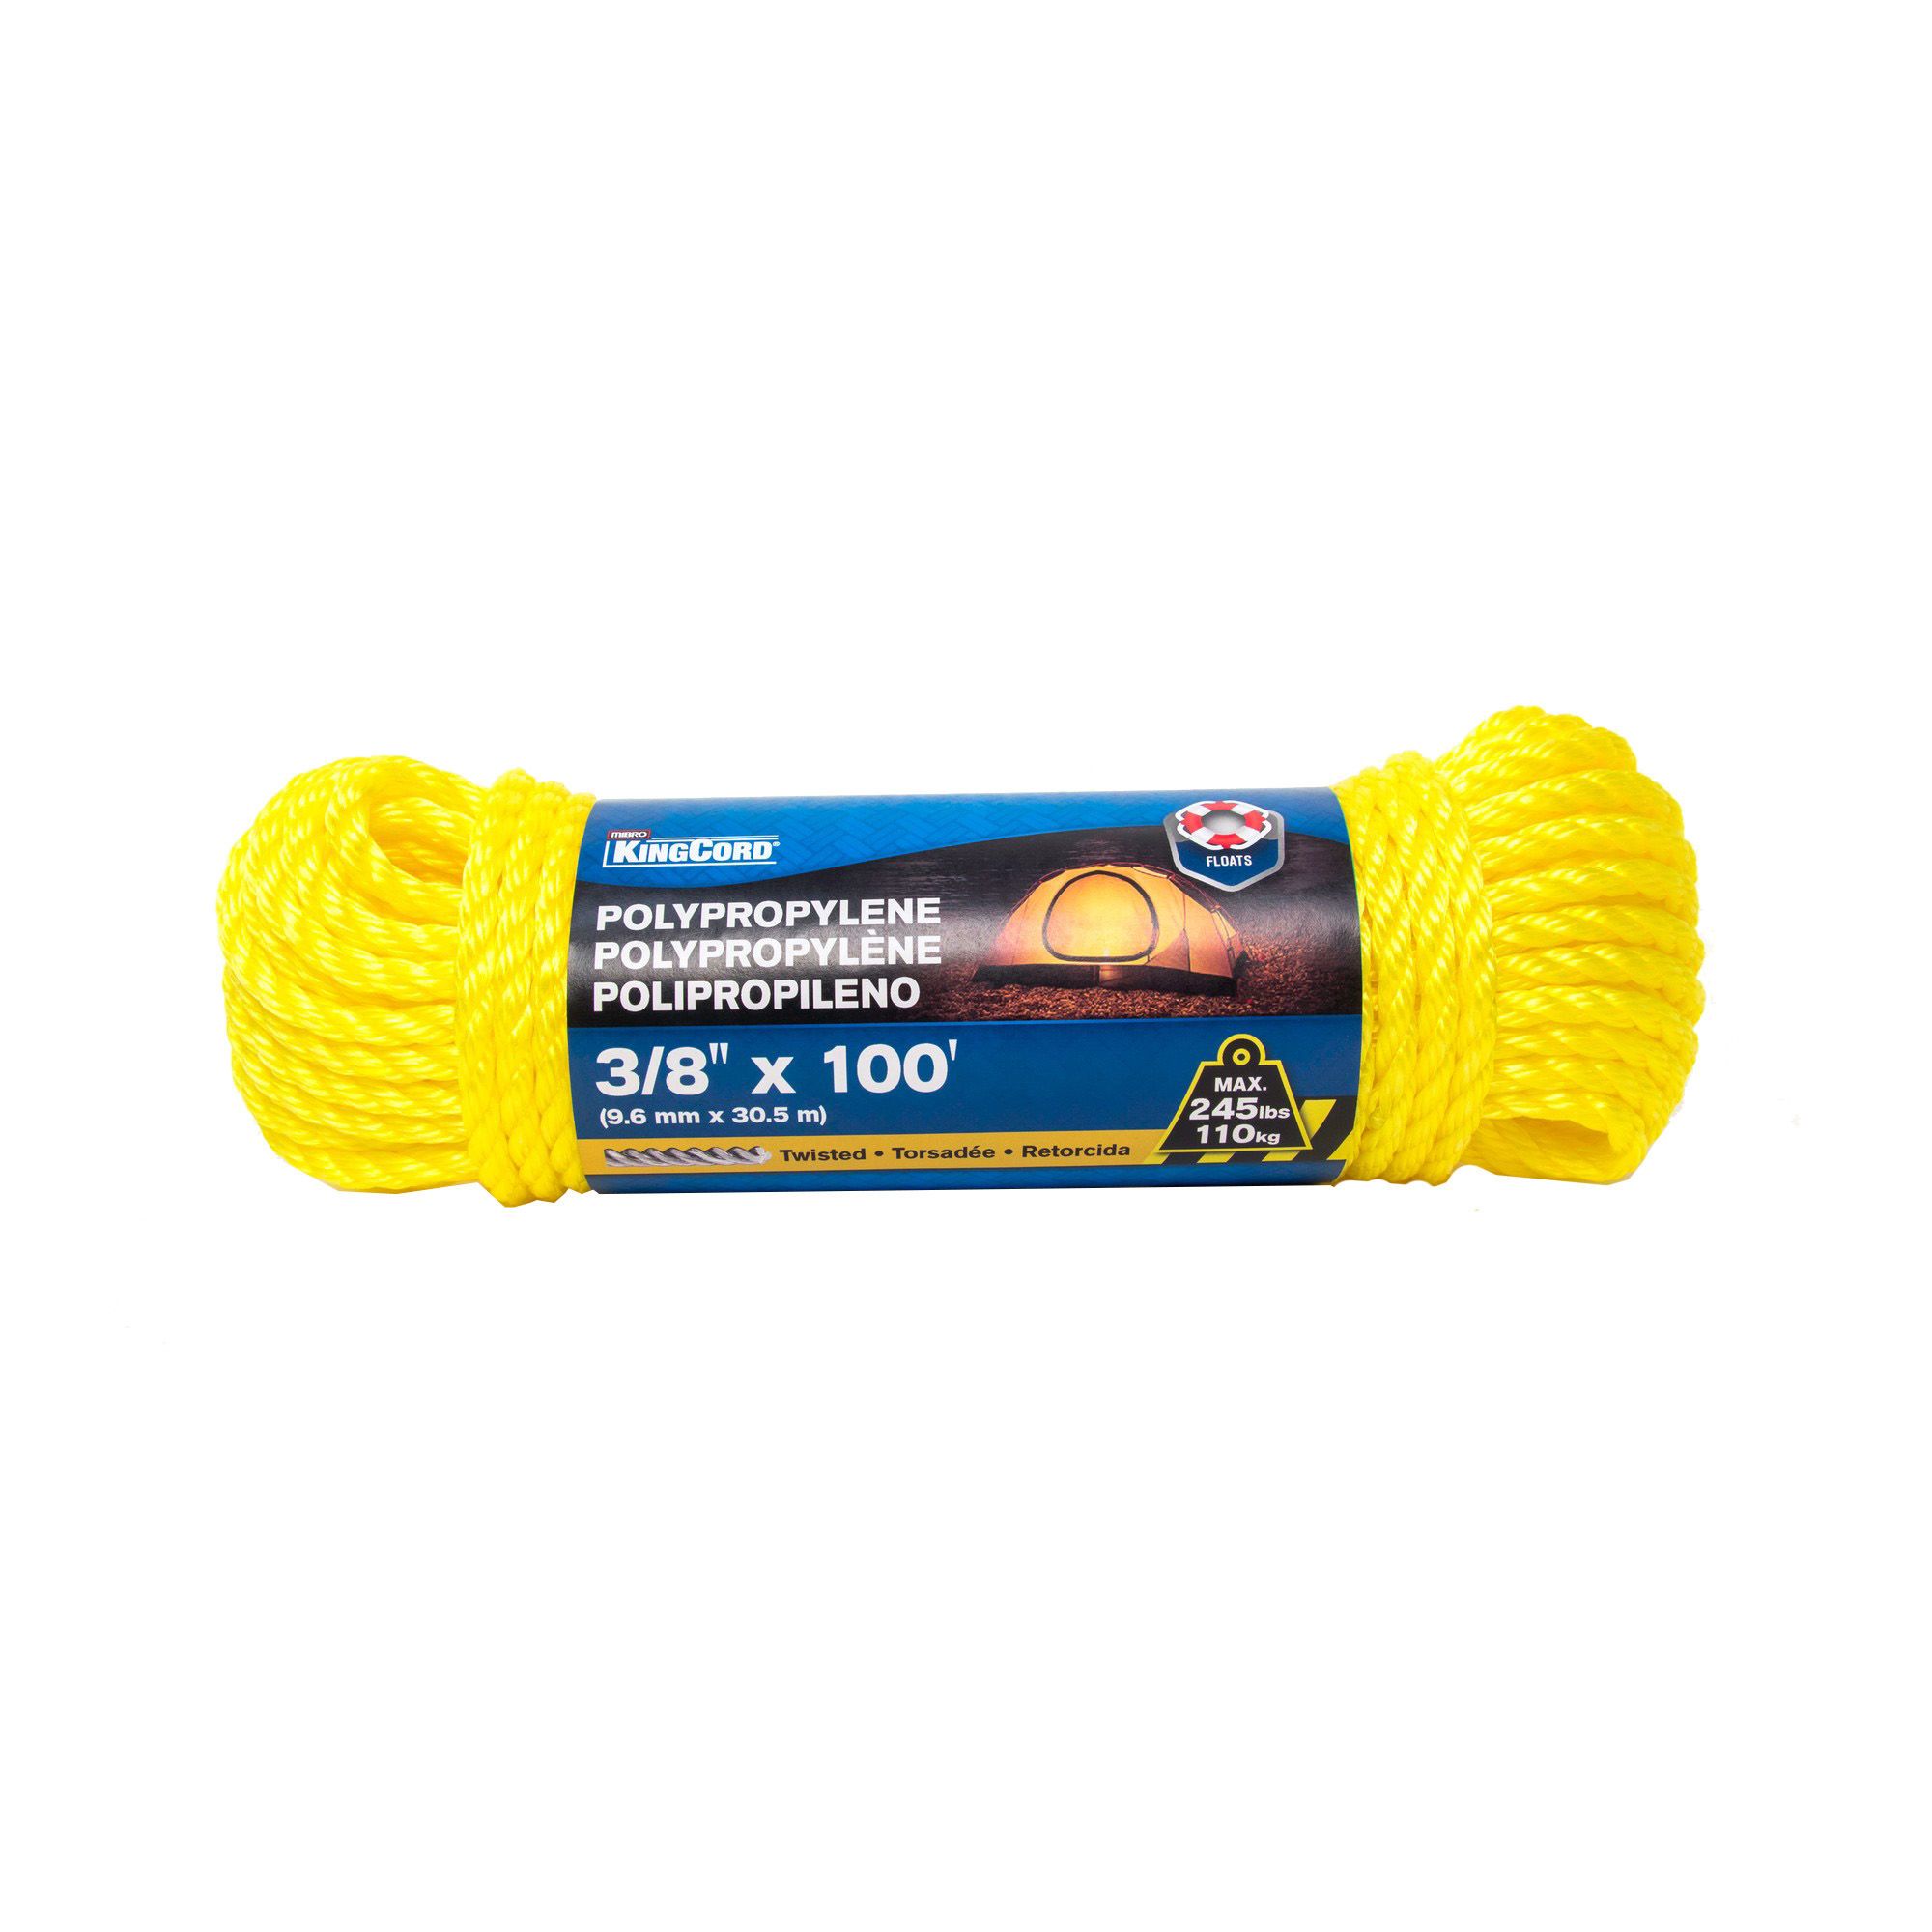 Twisted Polypropylene Rope - Yellow - 3/8 x 100' from KINGCORD